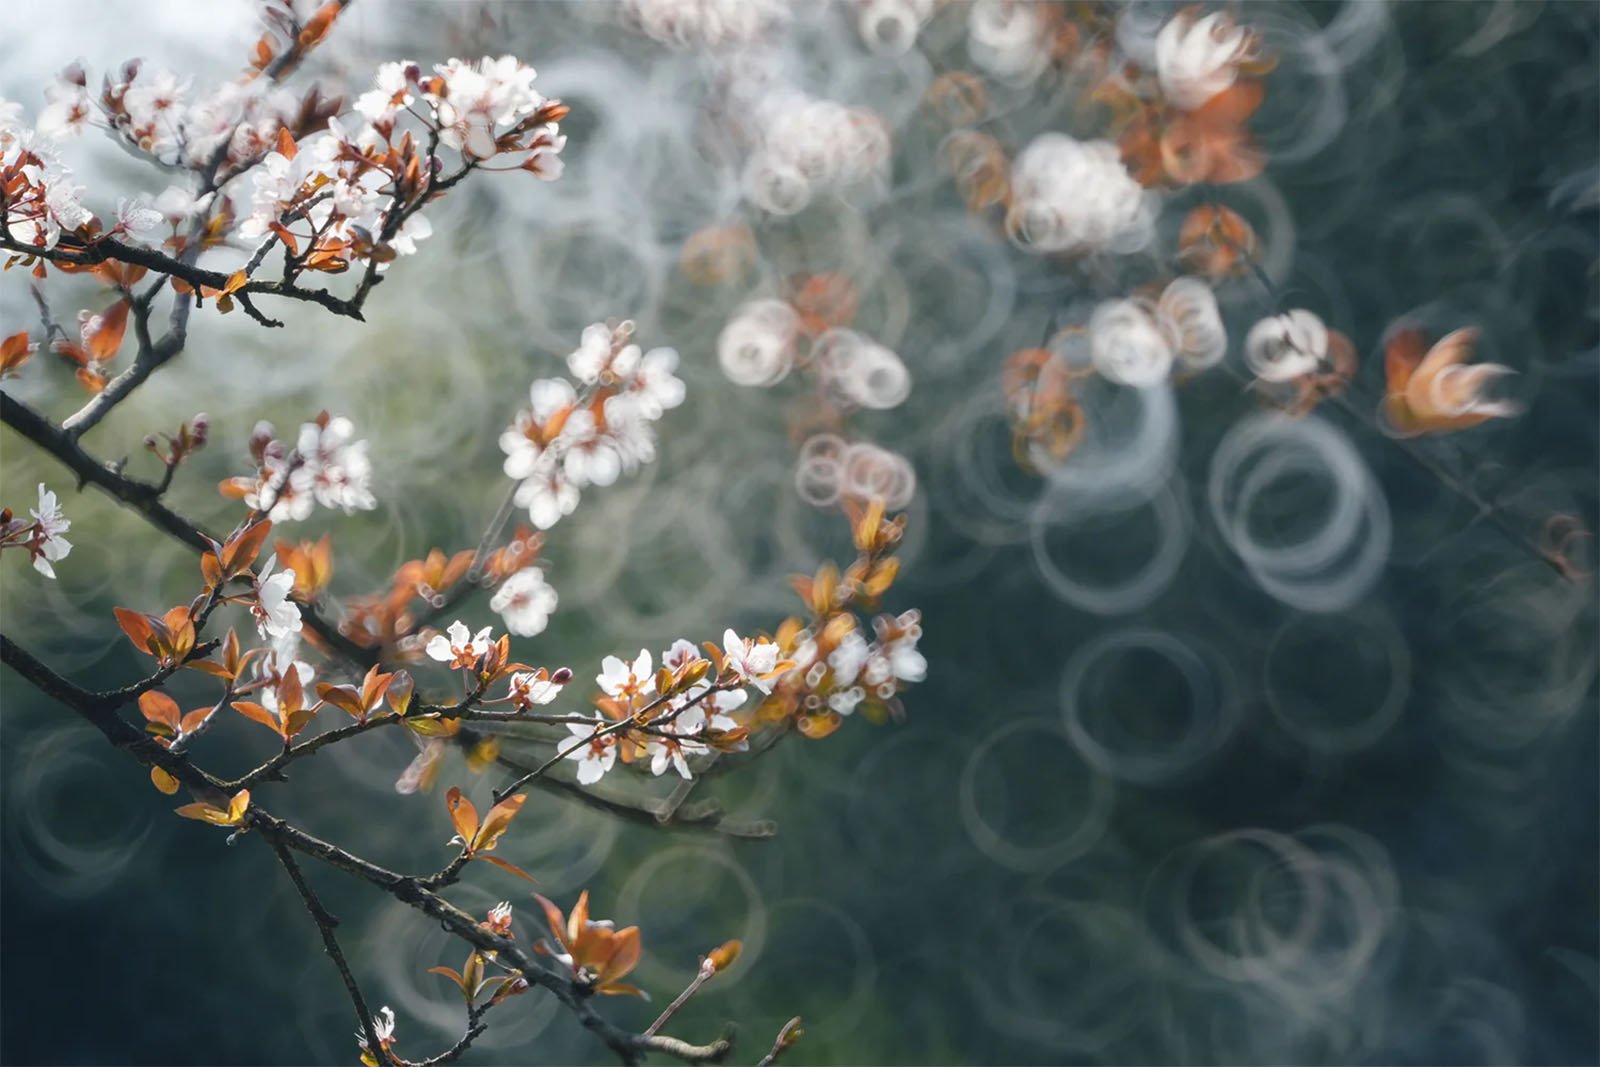 Close-up of branches with small white flowers and reddish-brown leaves. The background is blurred with bokeh circles, creating a soft, dreamy effect. The image captures the beauty and delicacy of spring blossoms.